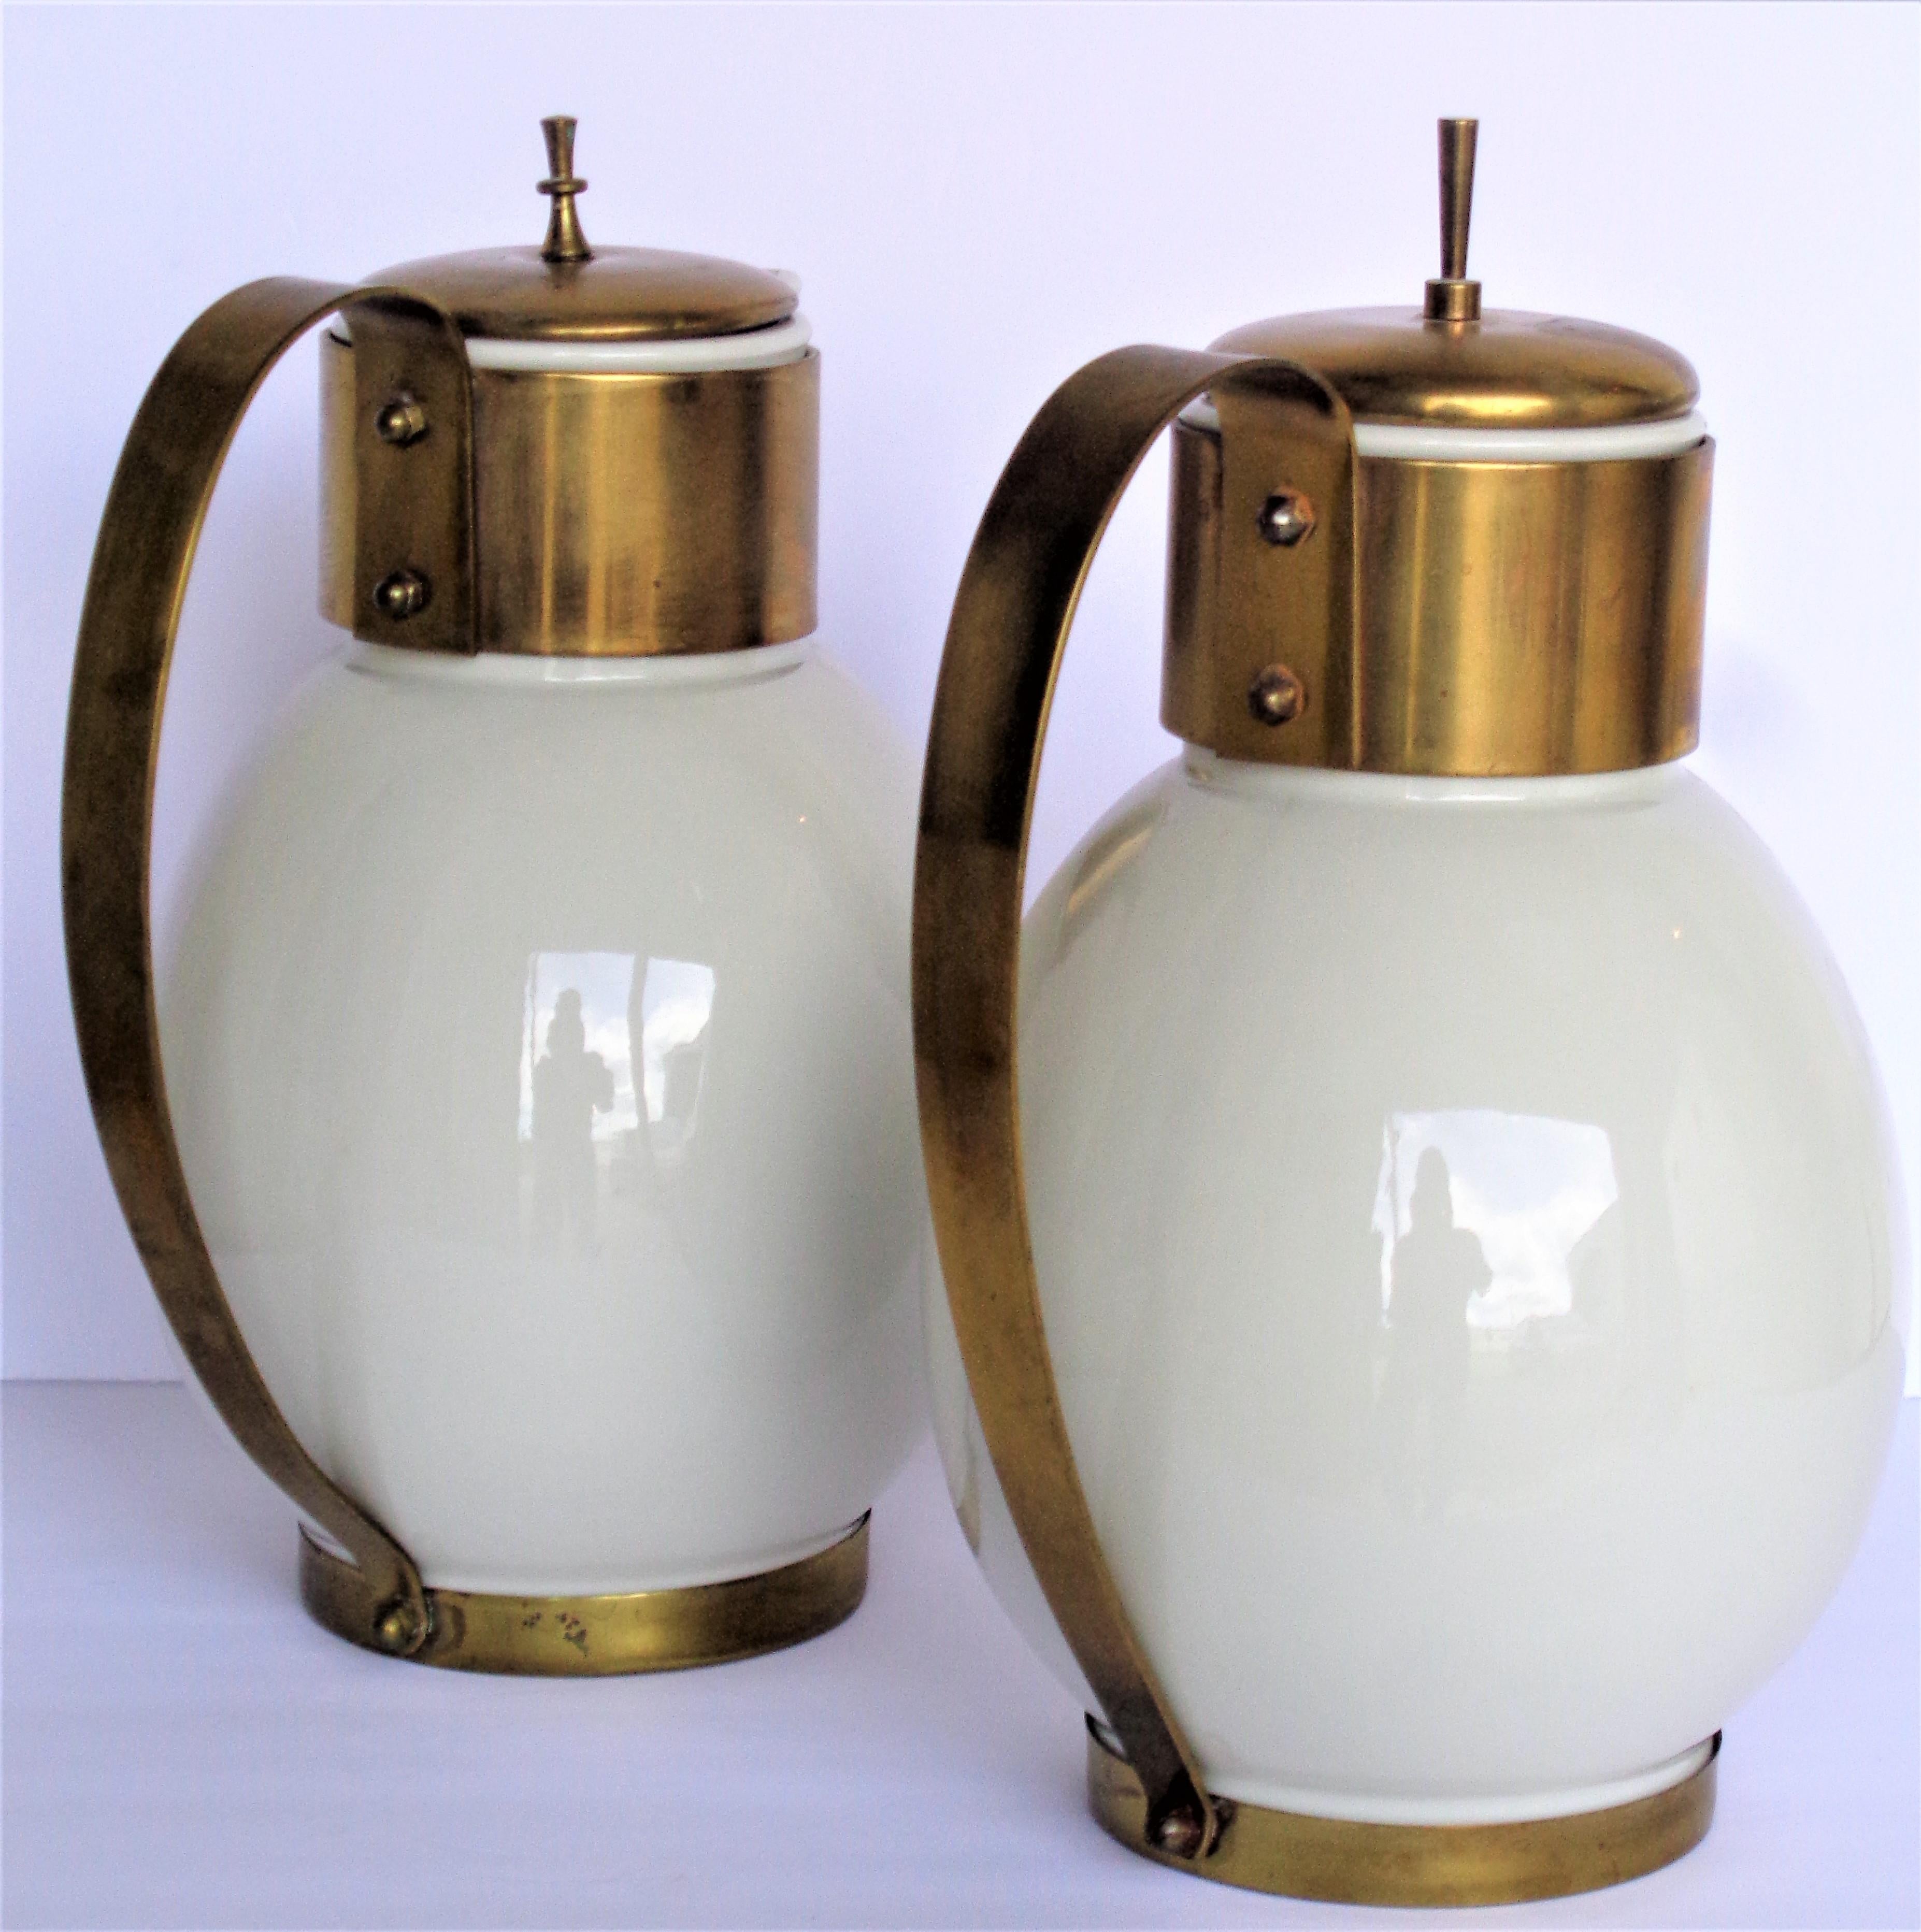 20th Century Porcelain and Brass Coffee Servers by Ernest Sohn, Circa 1950